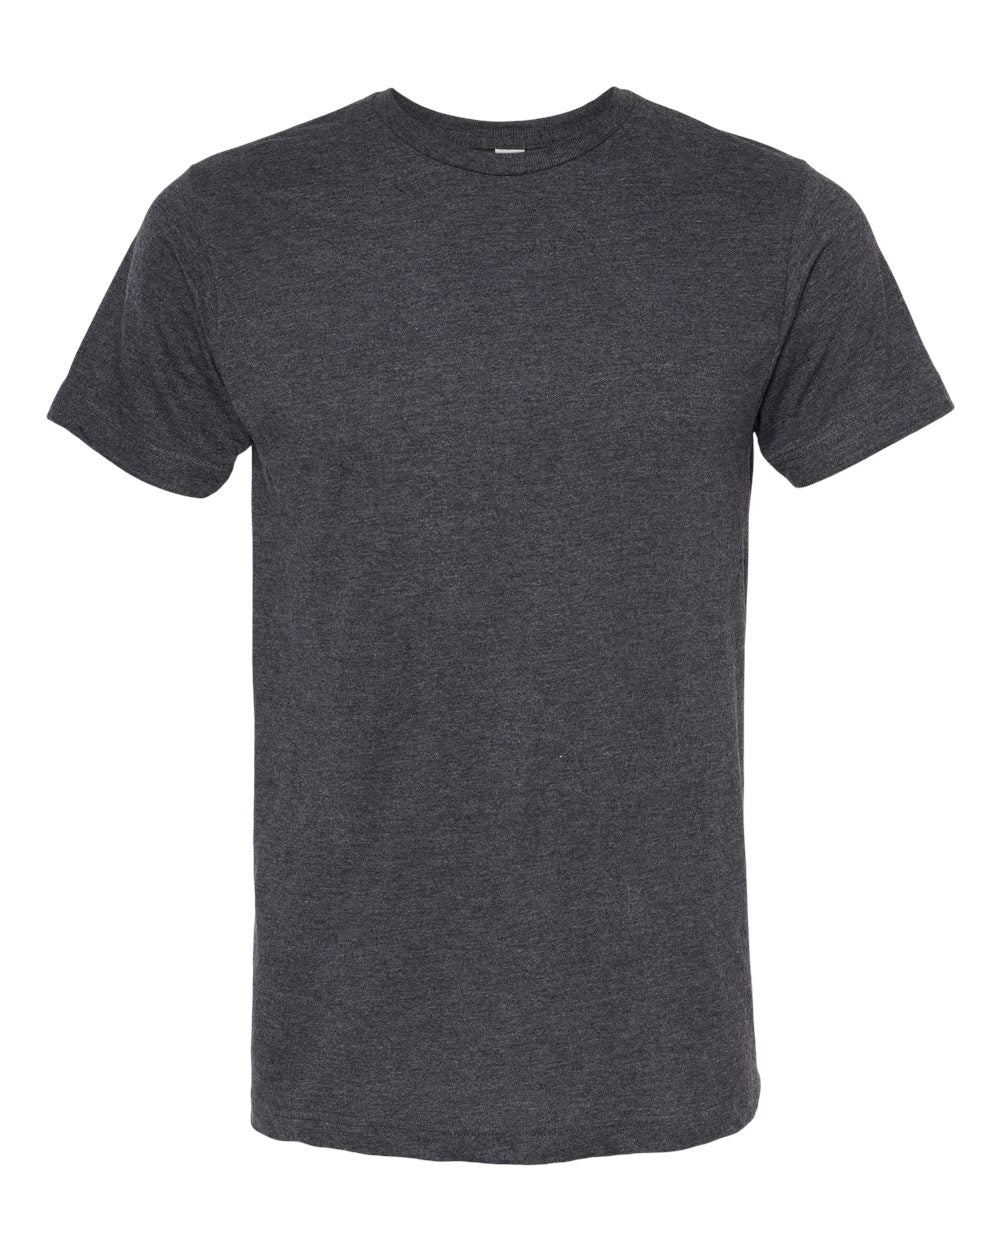 M&O Fine Jersey T-Shirt 4502 #color_Heather Charcoal